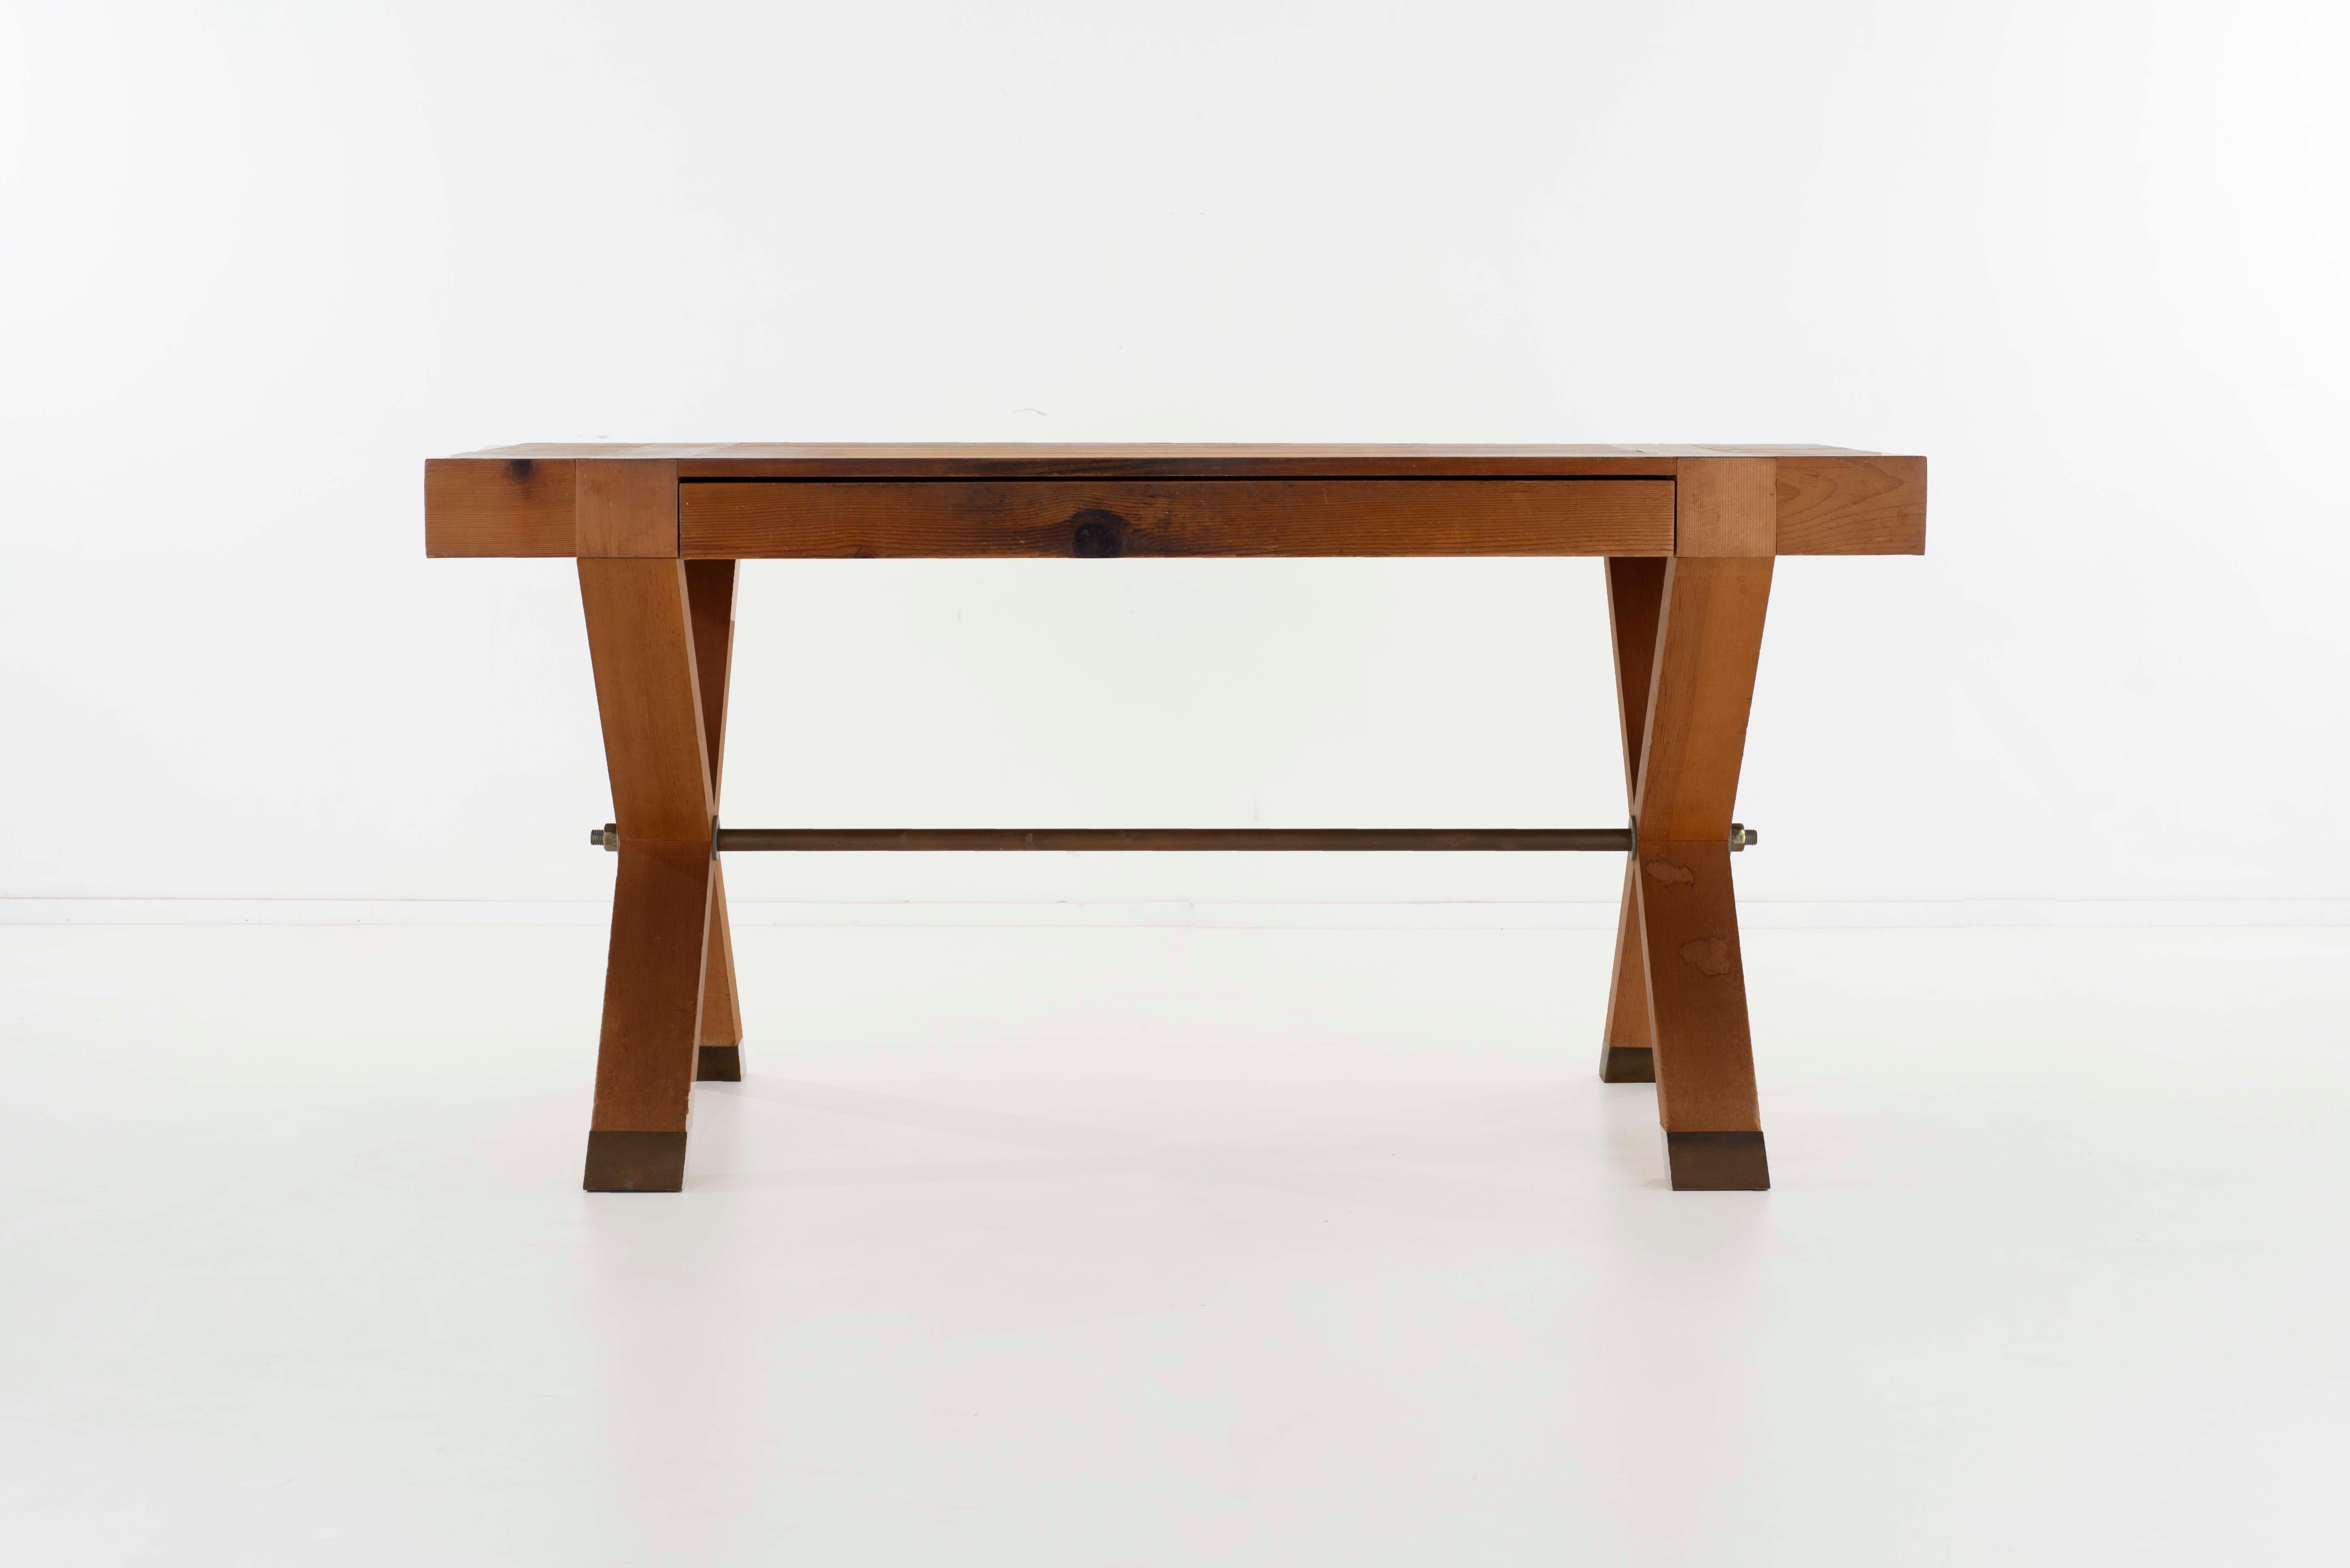 John Dickinson X-base pine trestle table/ console with single deep drawer for Partner Lawrence Maloney for the Firehouse, San Fransisco, California, 1970
Last image original Drawing from SFMOMA Collection
Original vintage condition, fading and